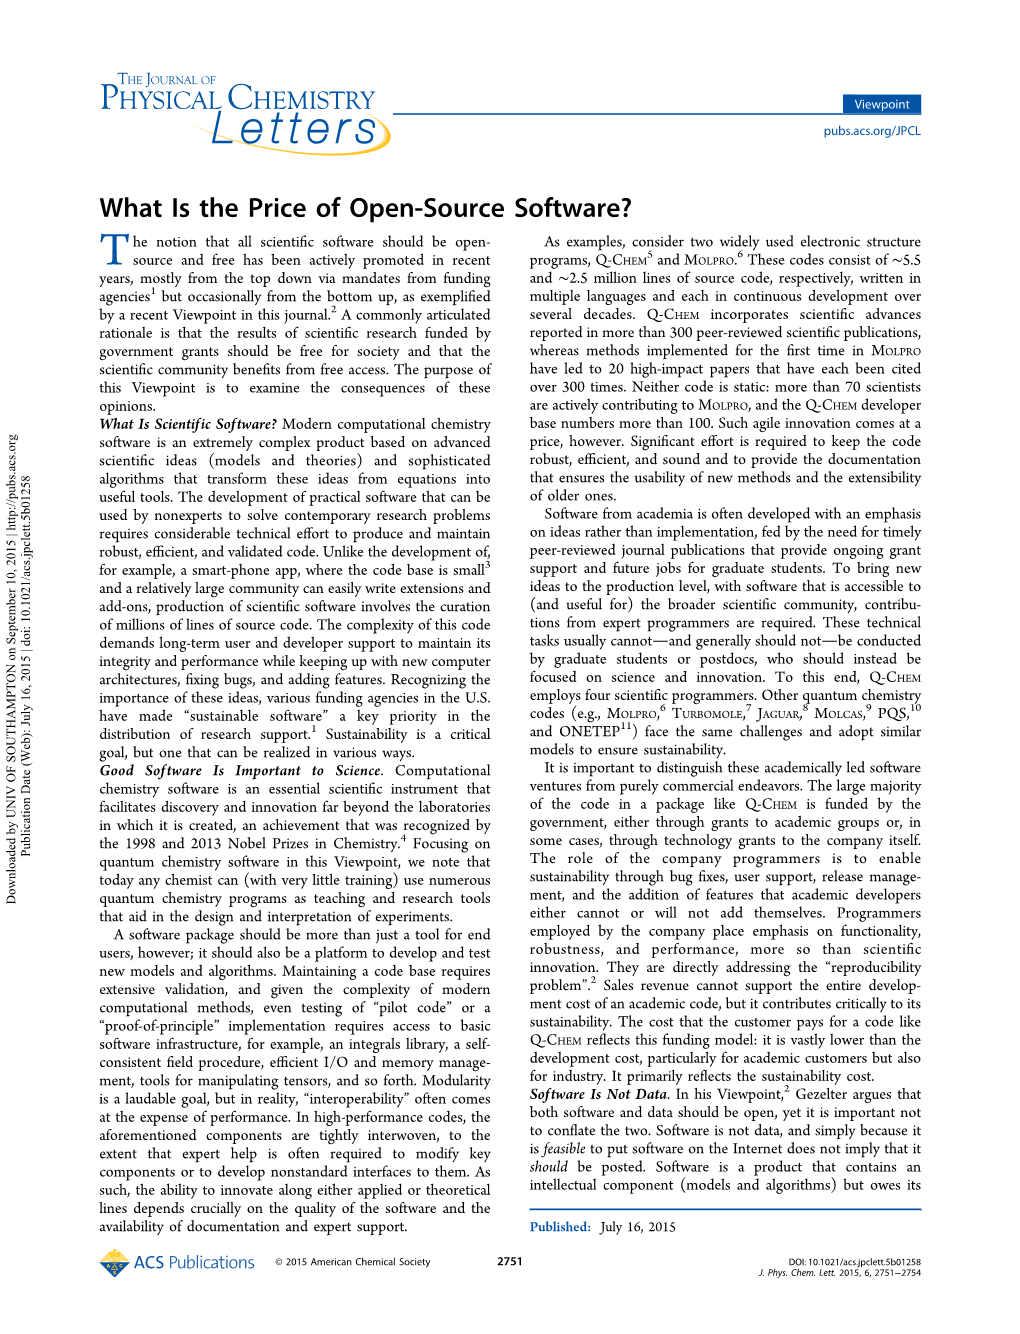 What Is the Price of Open-Source Software?